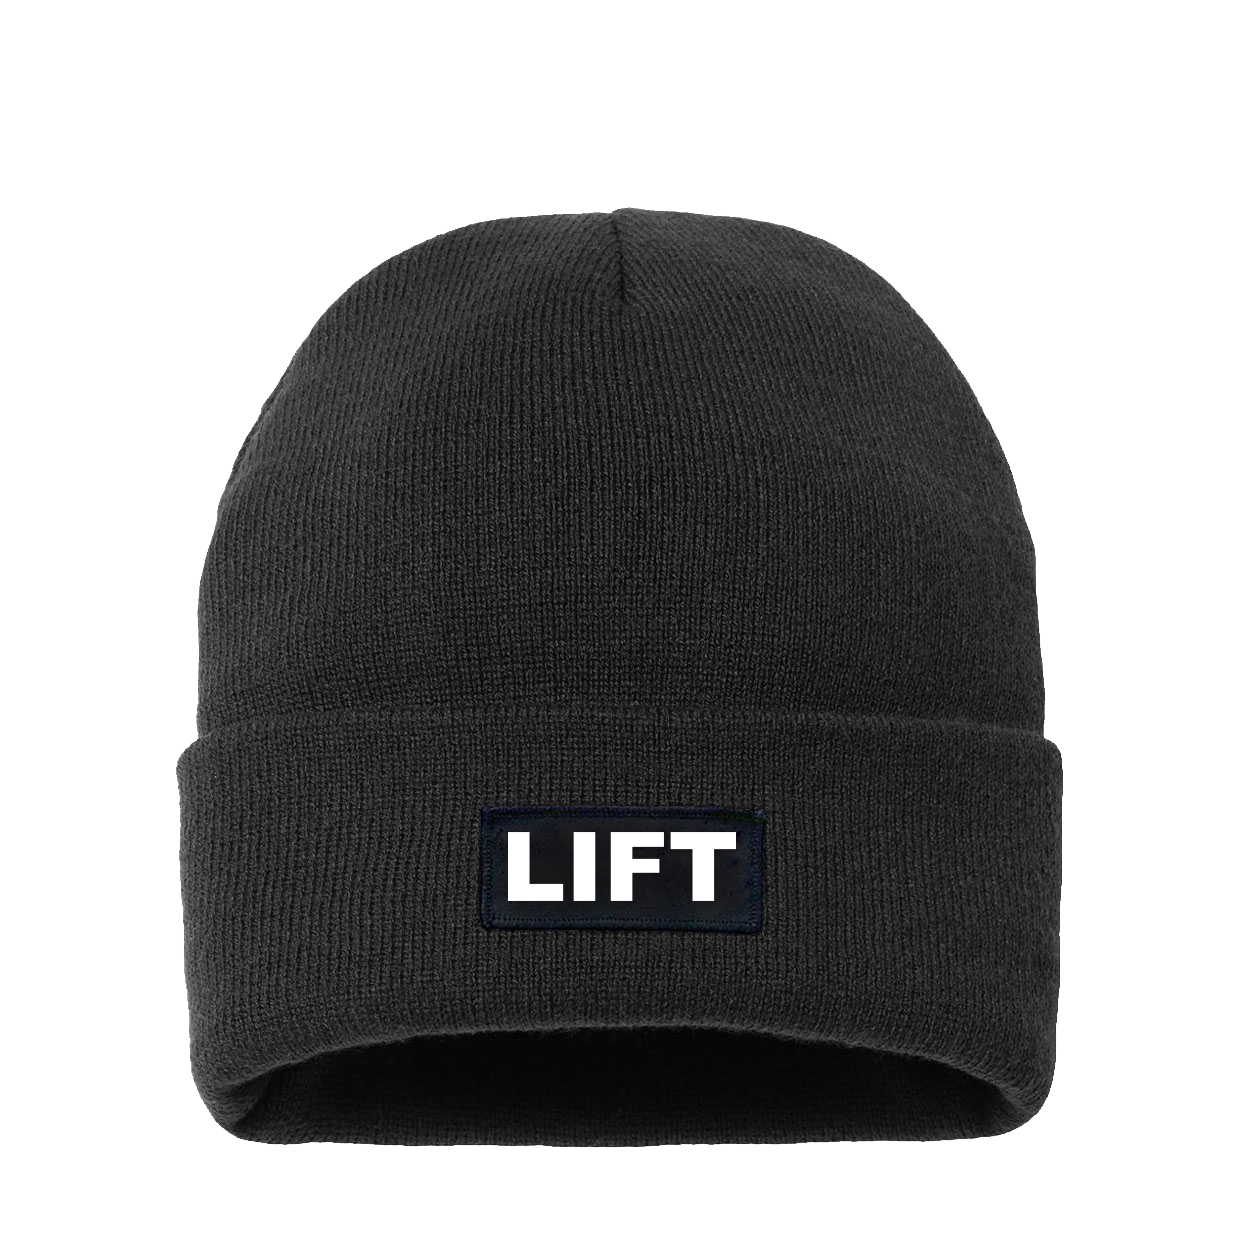 Lift Brand Logo Night Out Woven Patch Night Out Sherpa Lined Cuffed Beanie Black